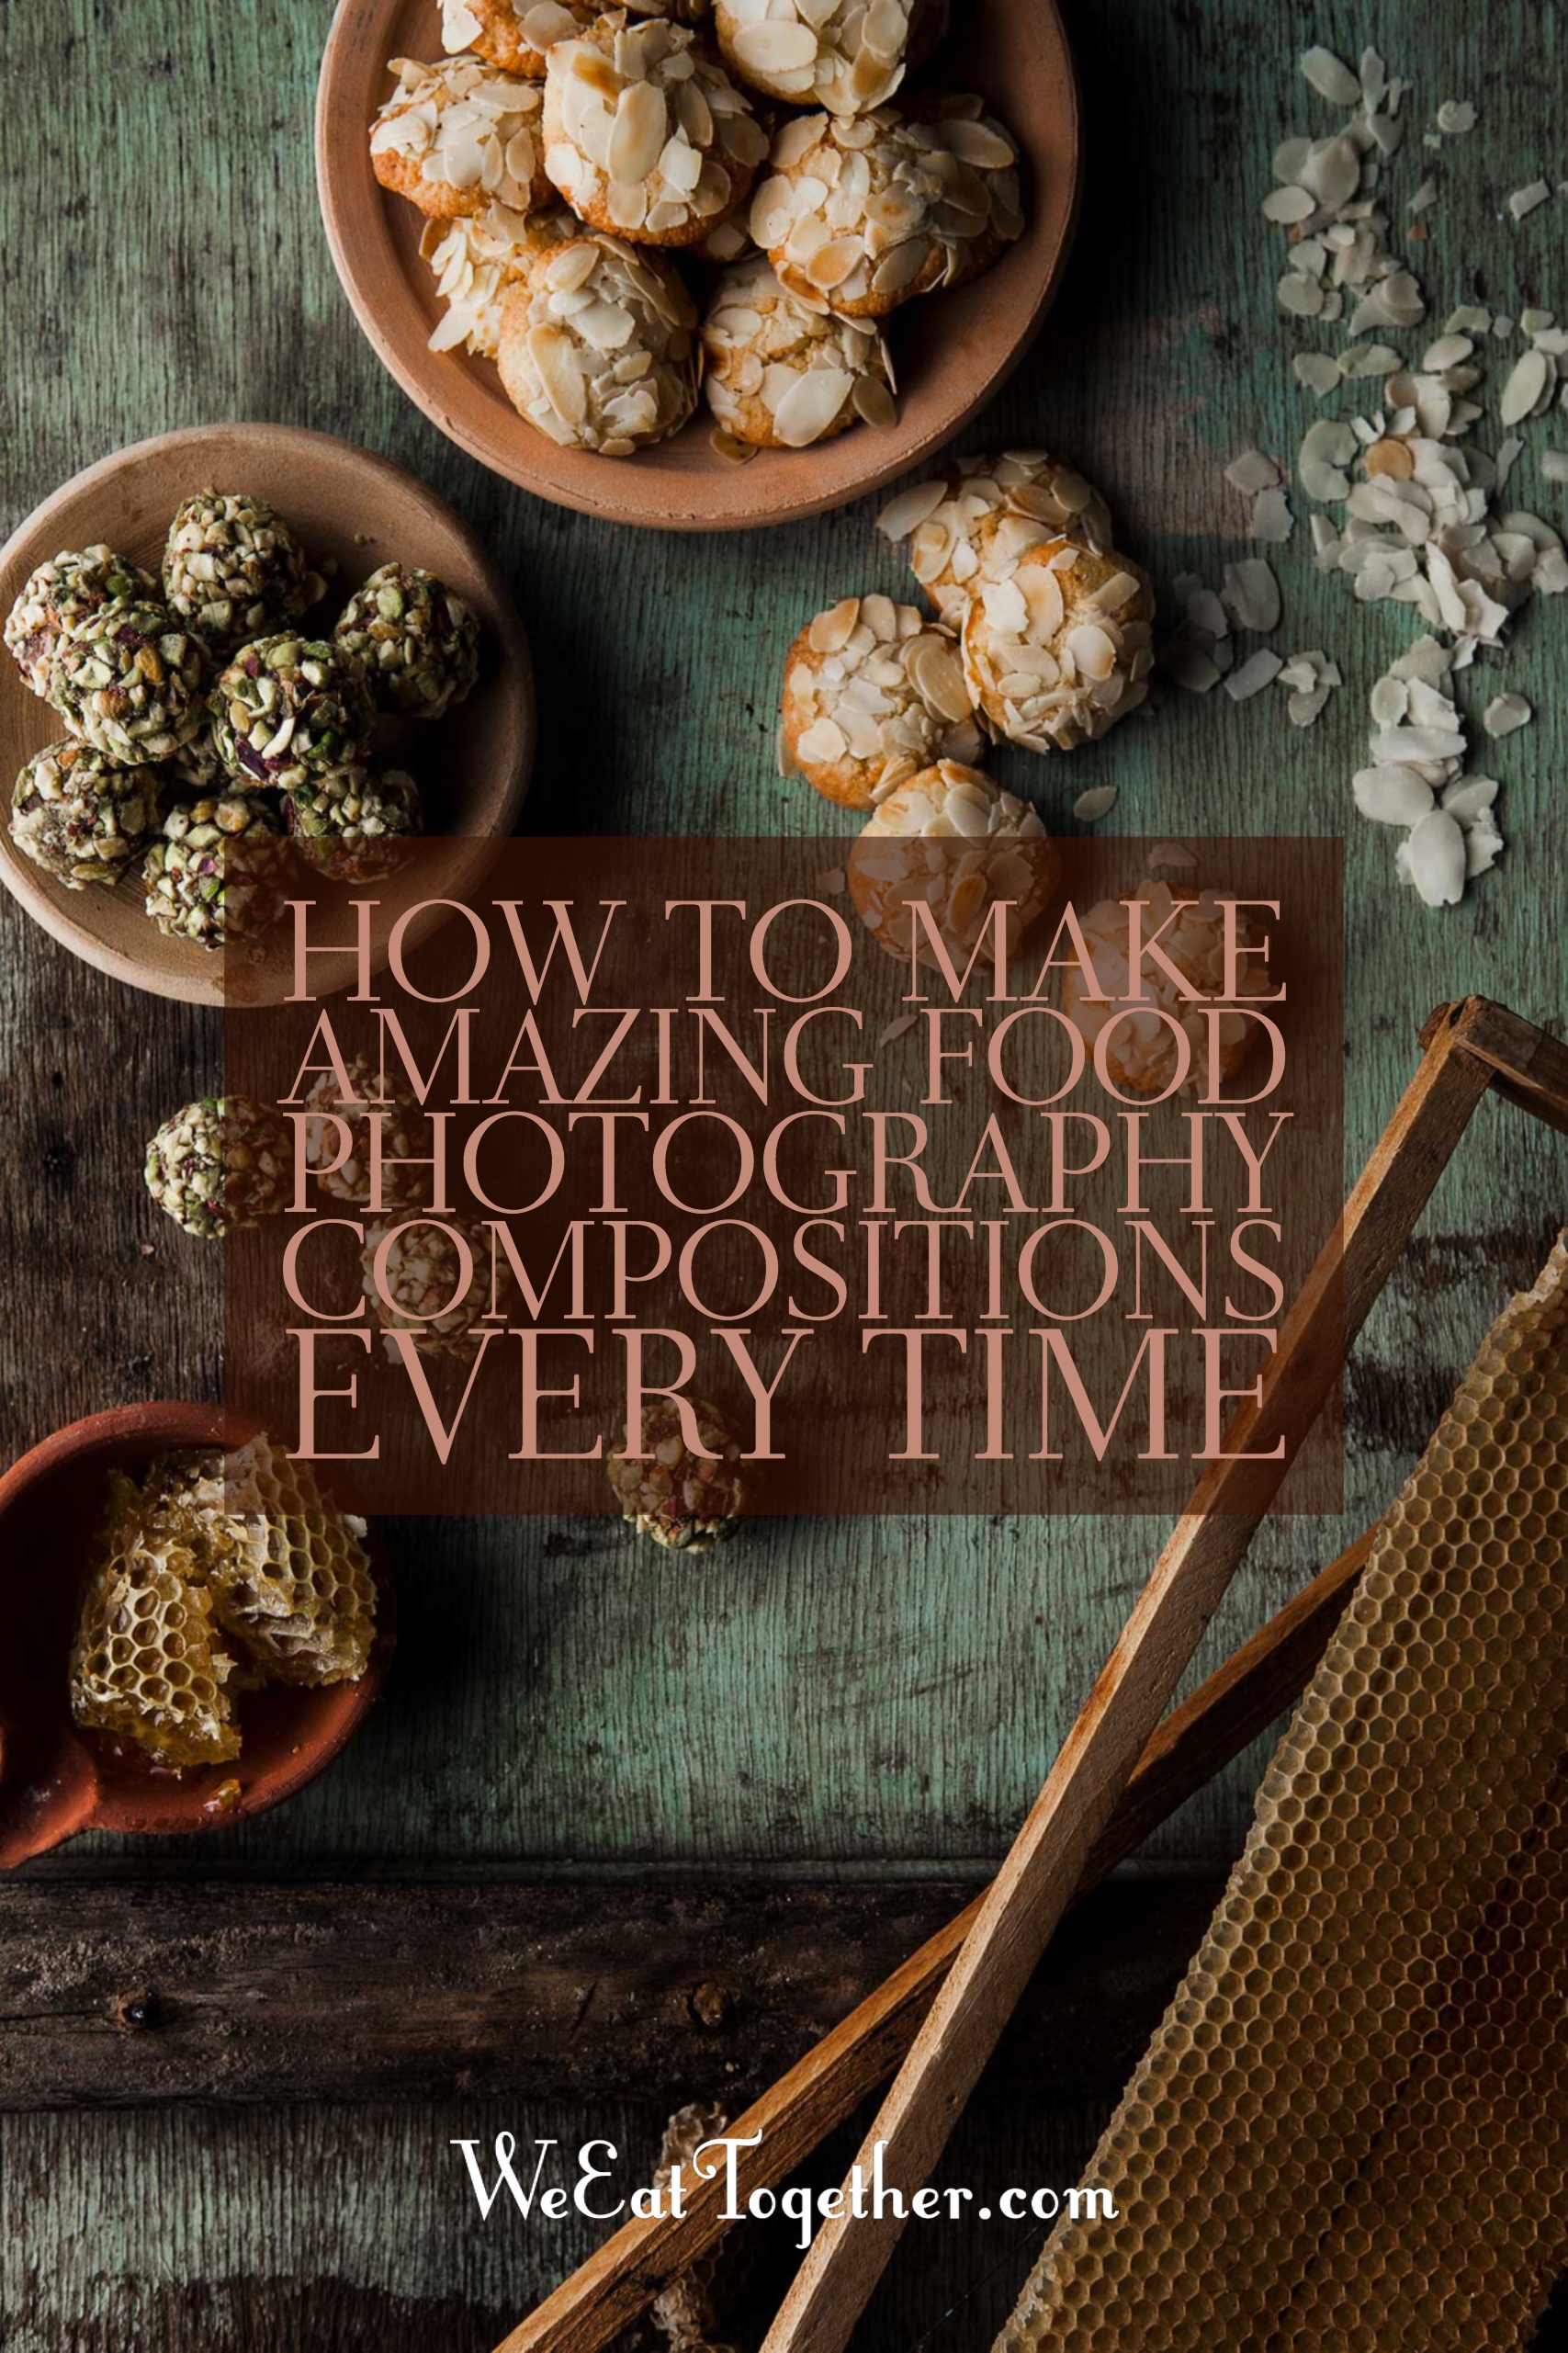 From simple to complex scenes, food photography compositions are actually my true love. Let me show you how to make quick and amazing compositions every time